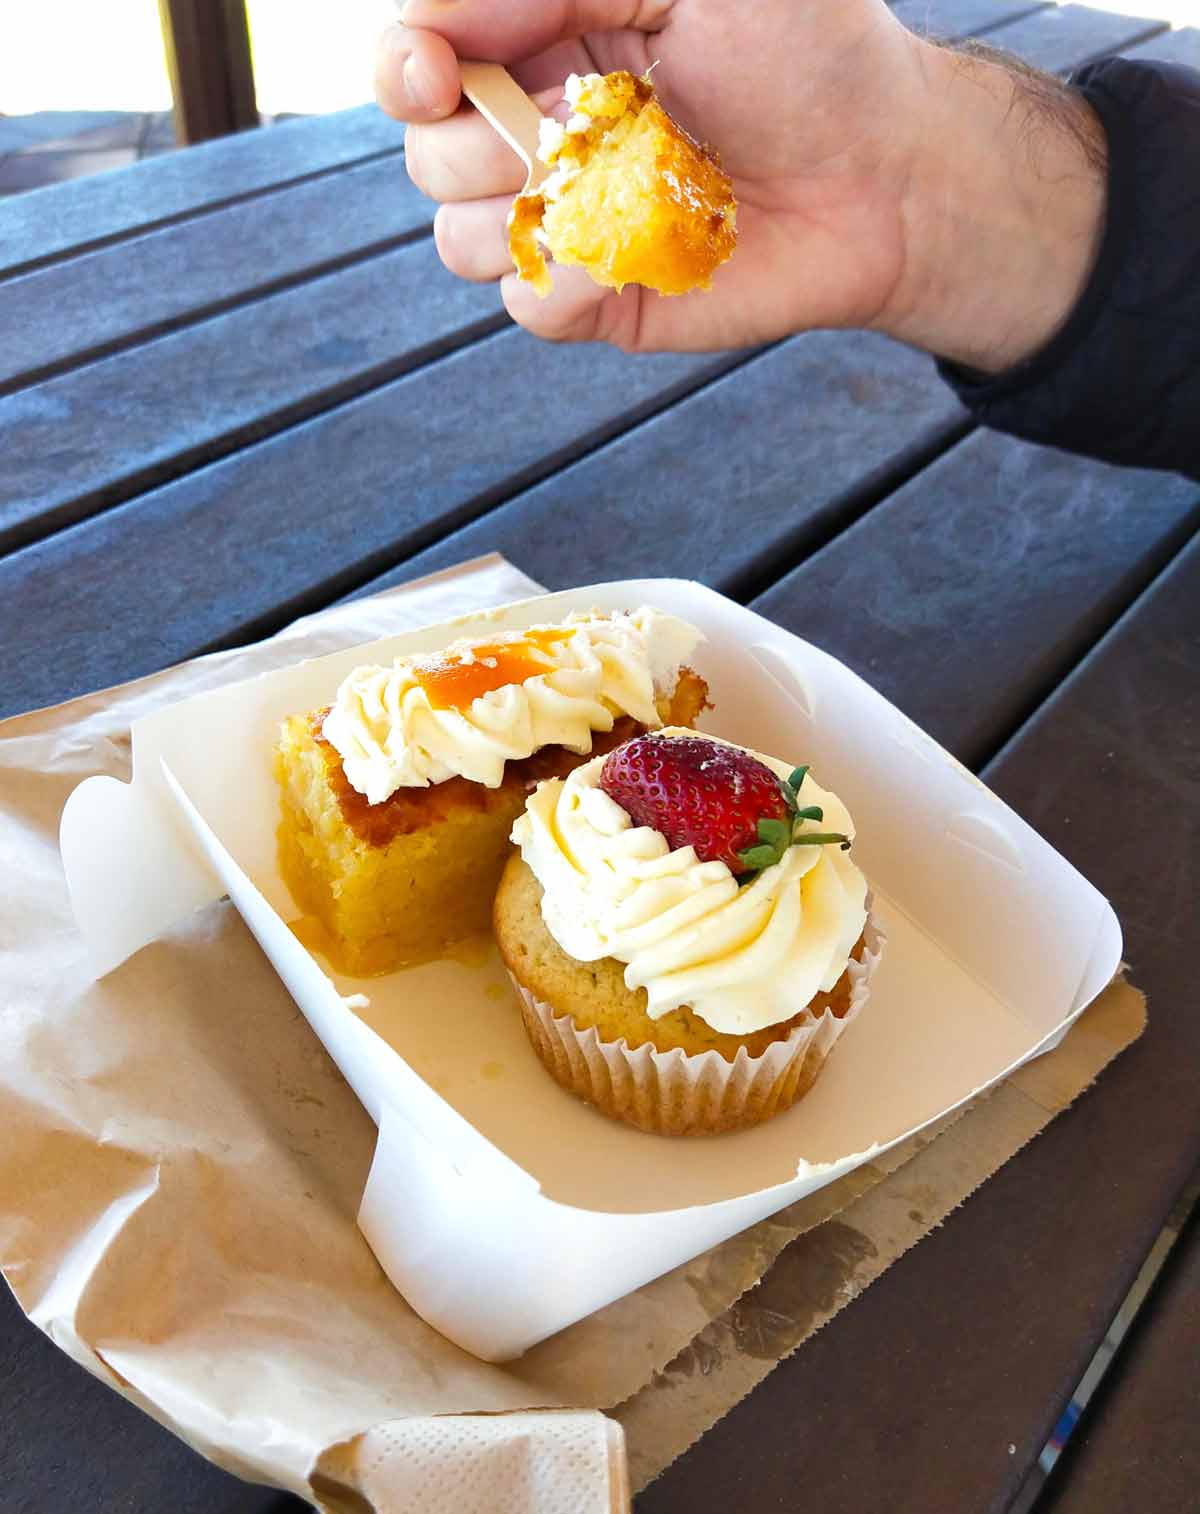 Small cakes from Whisk Away Cafe in Whyalla, Eyre Peninsula, South Australia